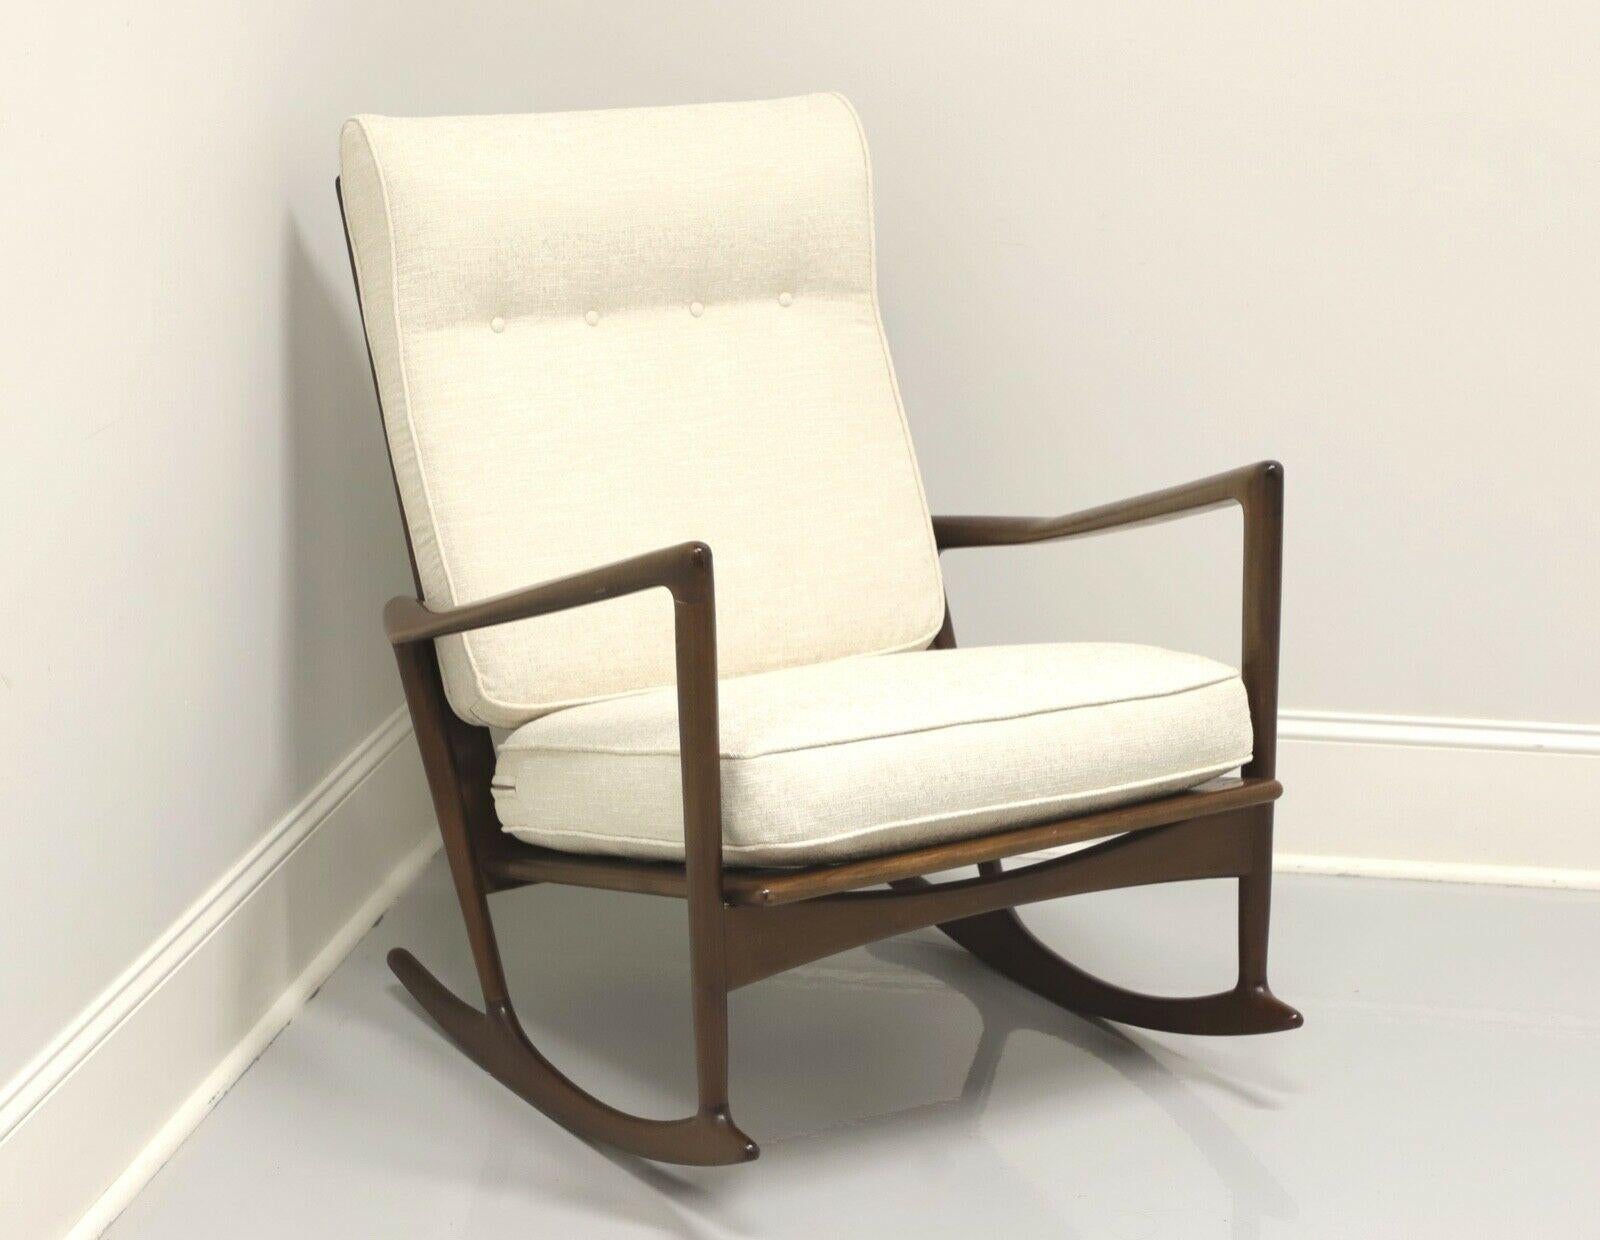 Danish Mid Century Modern Sculpted Rocking Chair by Ib Kofod-Larsen for Selig -A For Sale 5